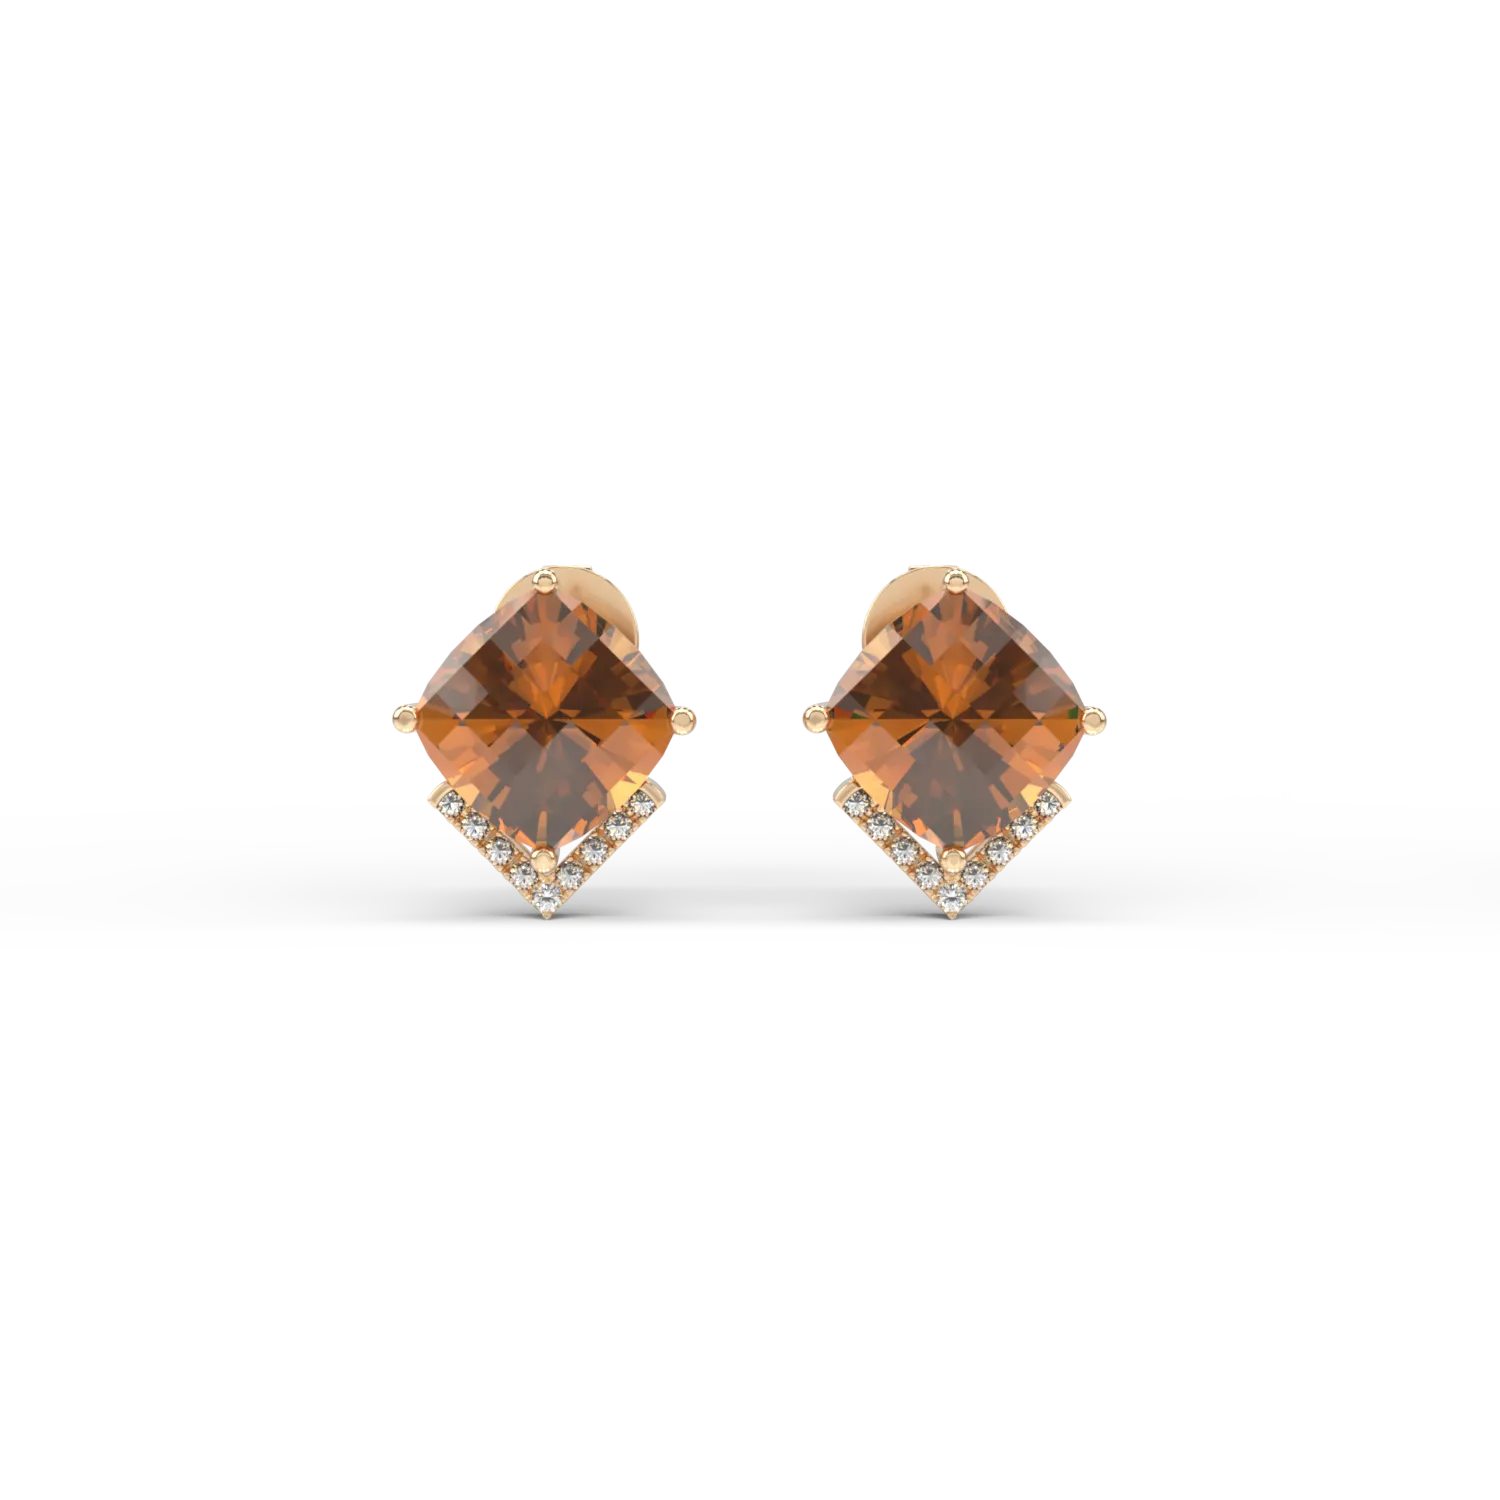 18K yellow gold earrings with 5ct citrine and 0.1ct diamonds